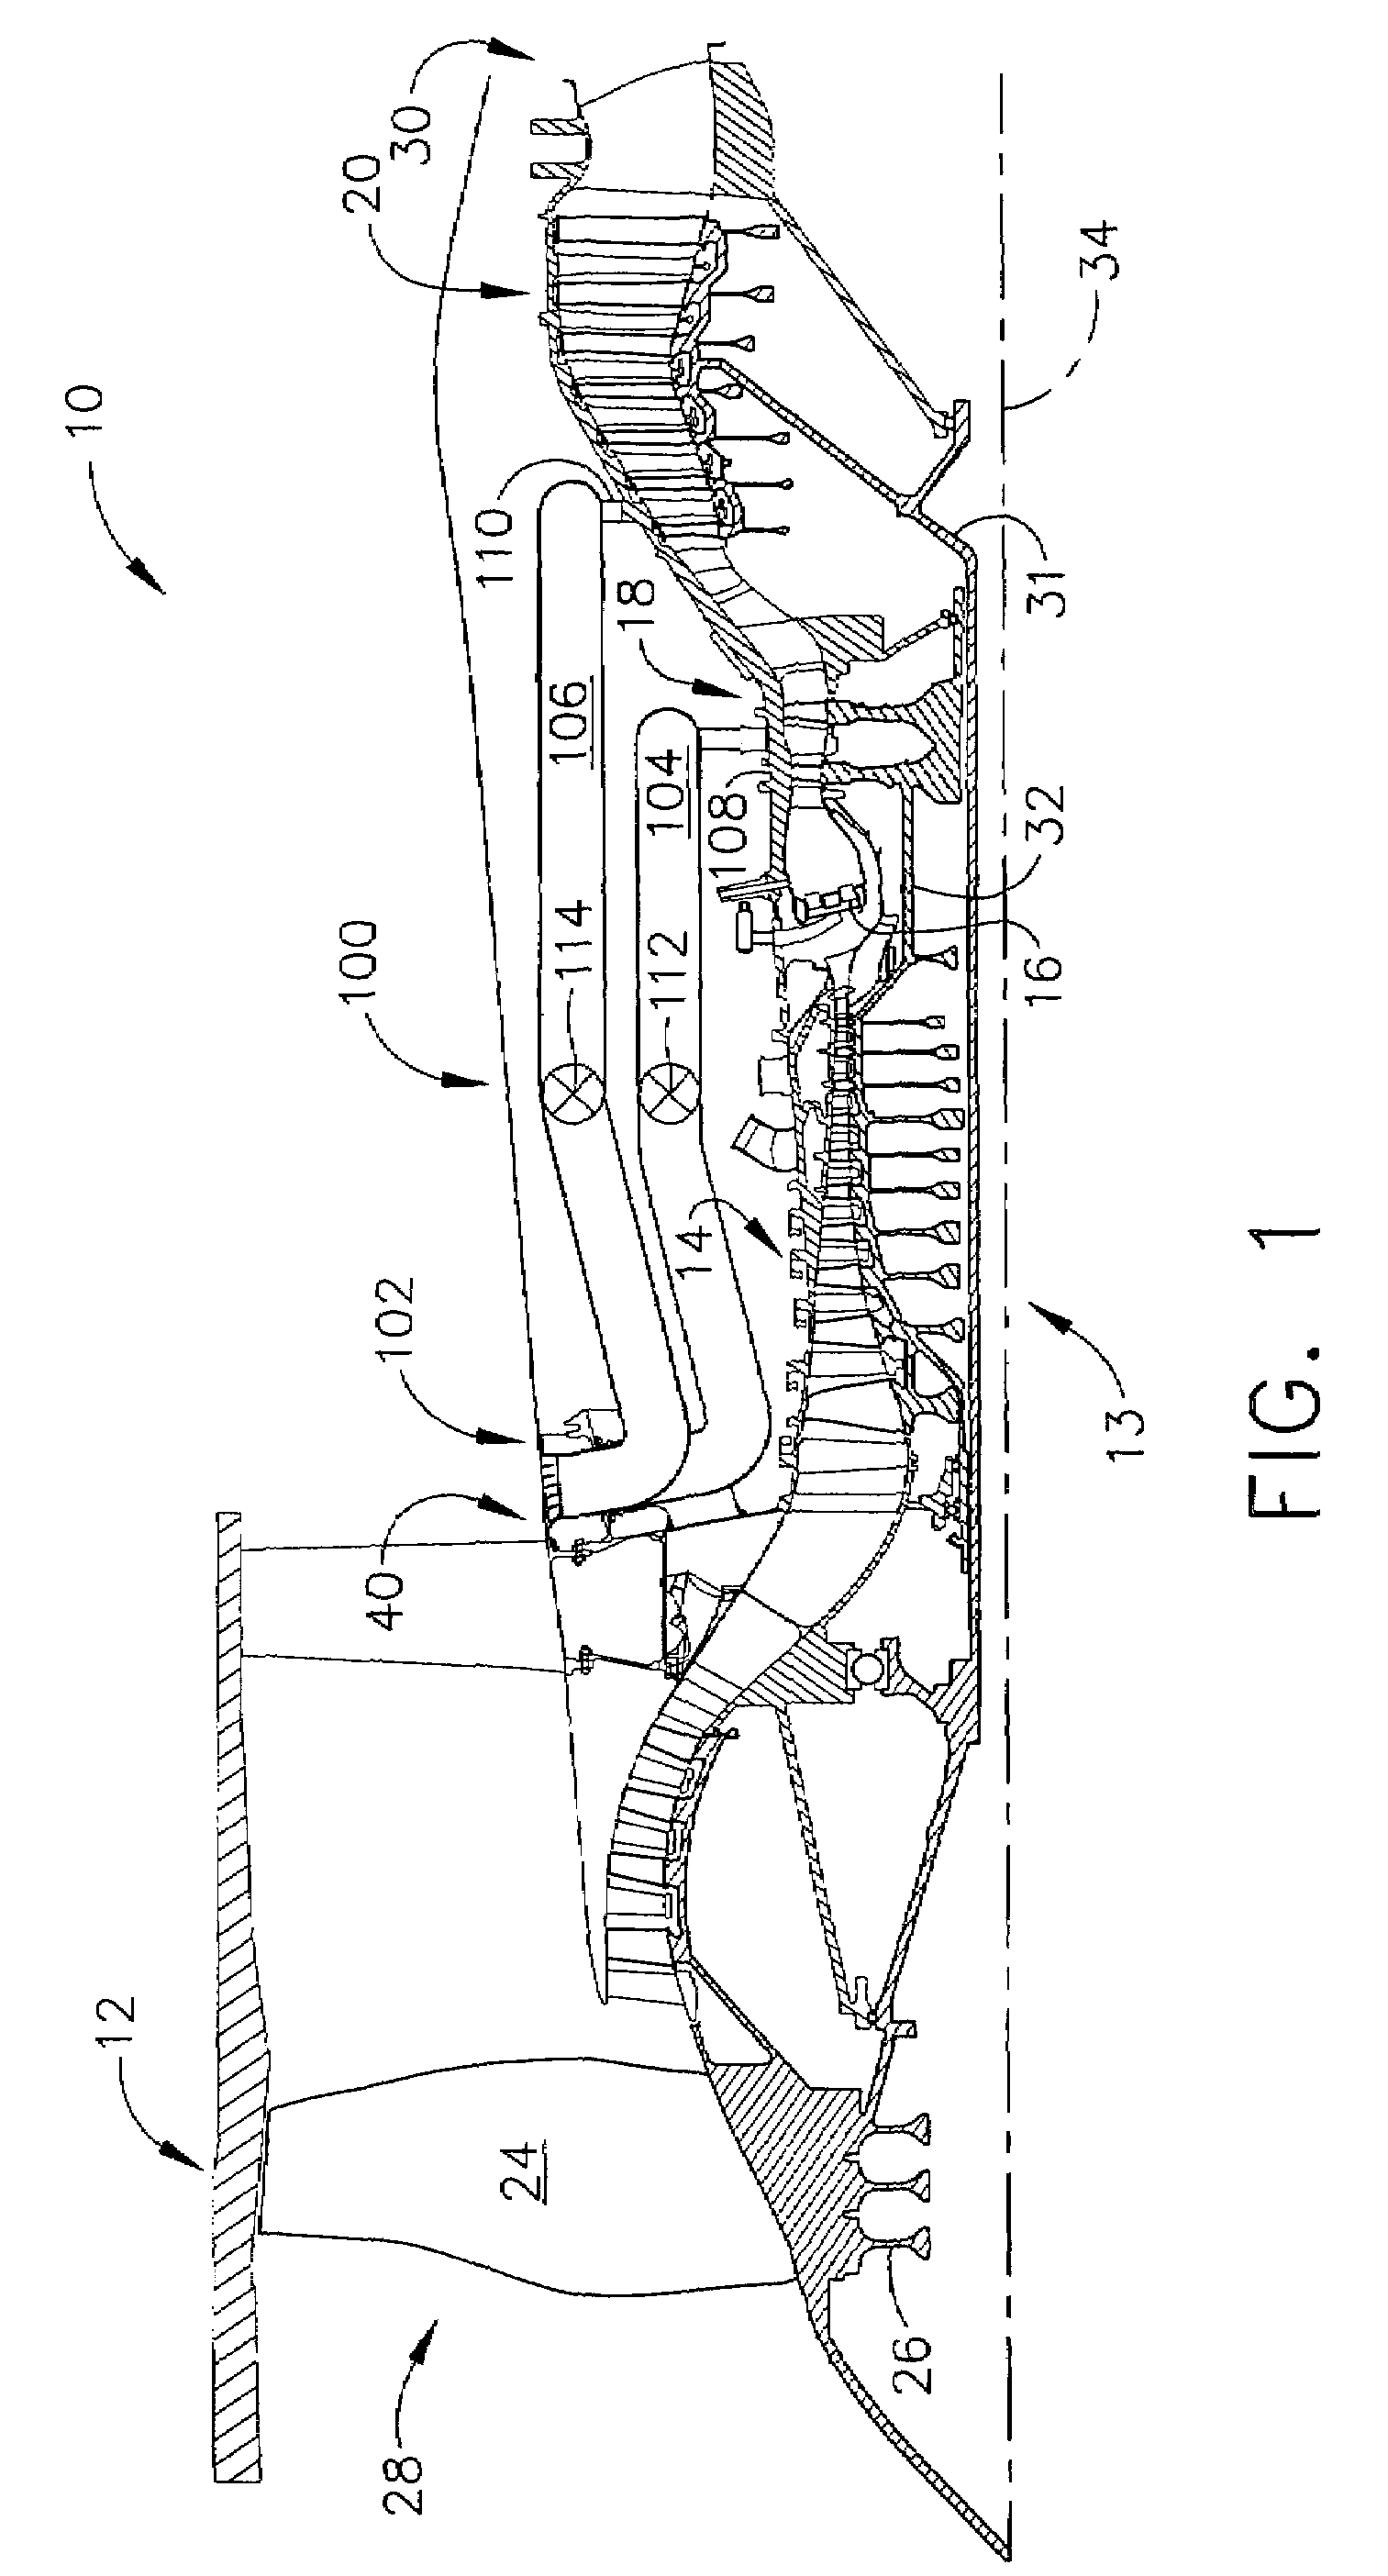 Method and apparatus for operating gas turbine engines